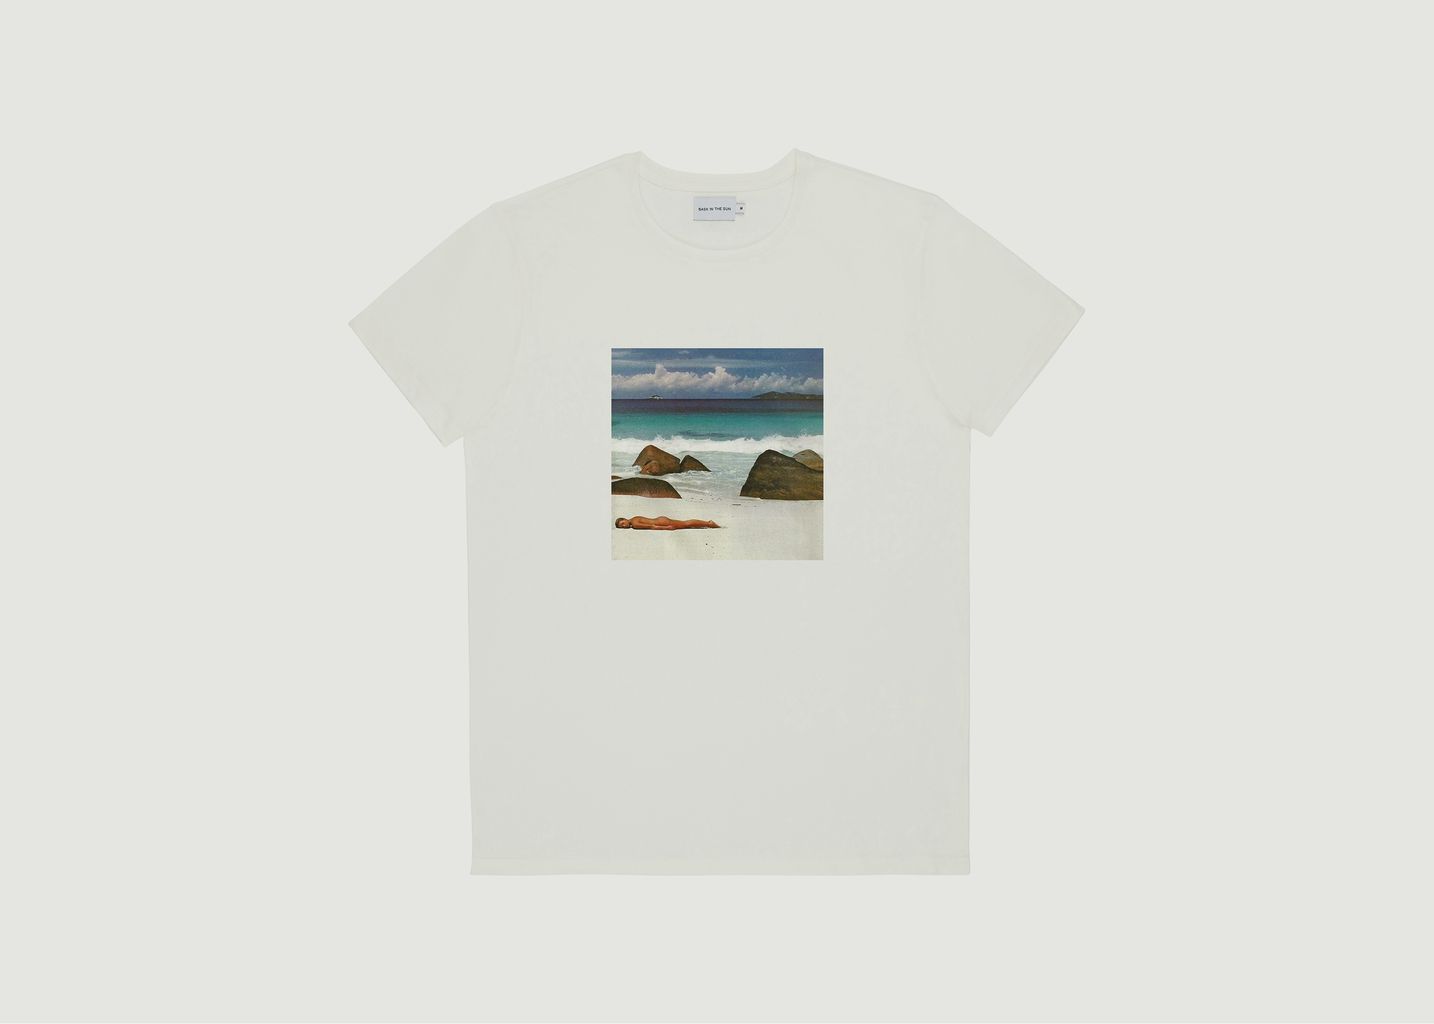 Bask in the sun Nap Photography Printed T-shirt